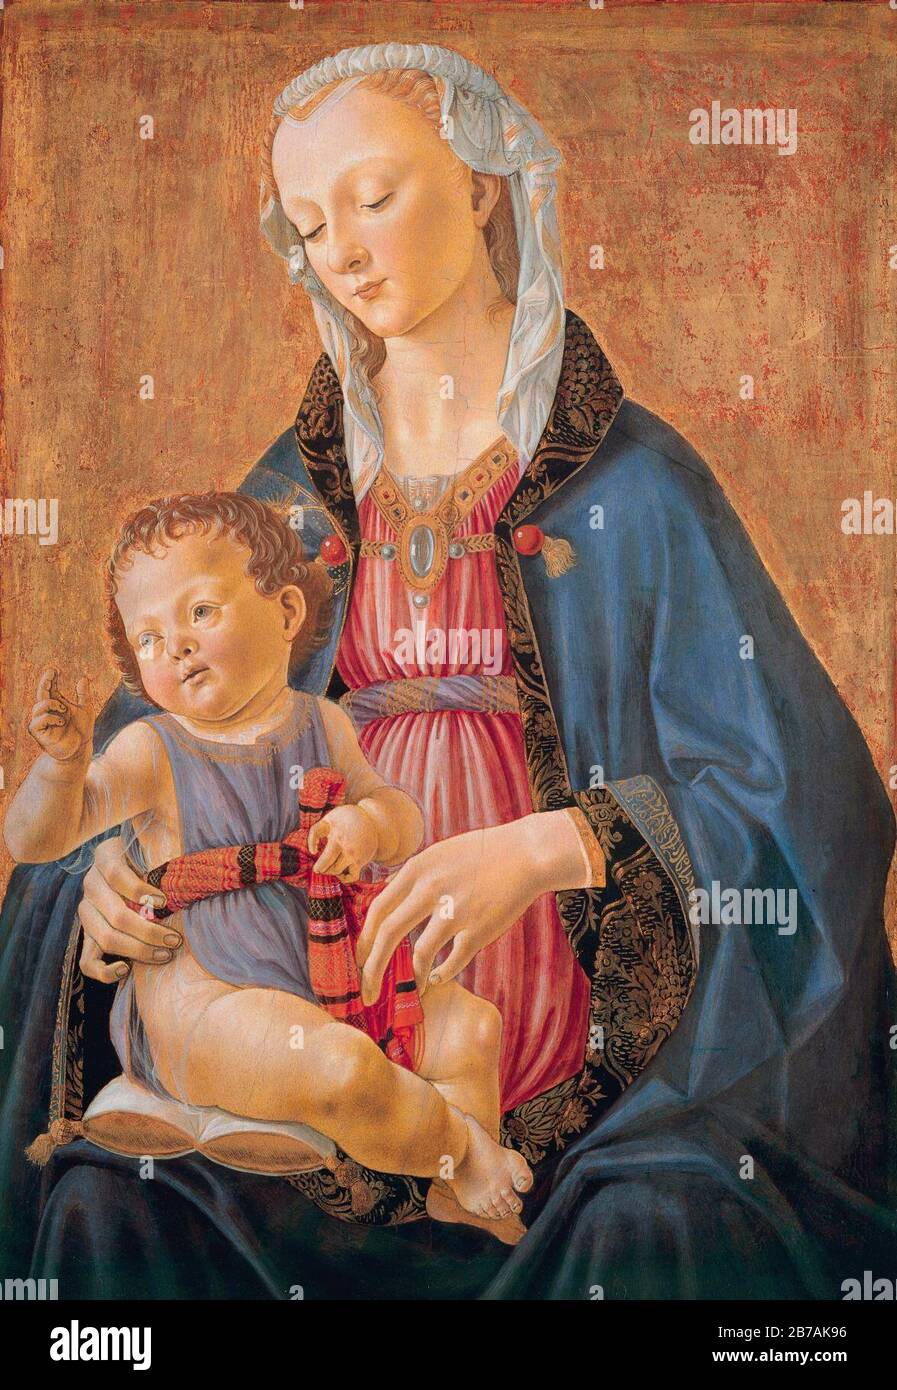 Ghirlandaio, madonna col Bambino, collezione kress, 1470-1475 environ. Banque D'Images